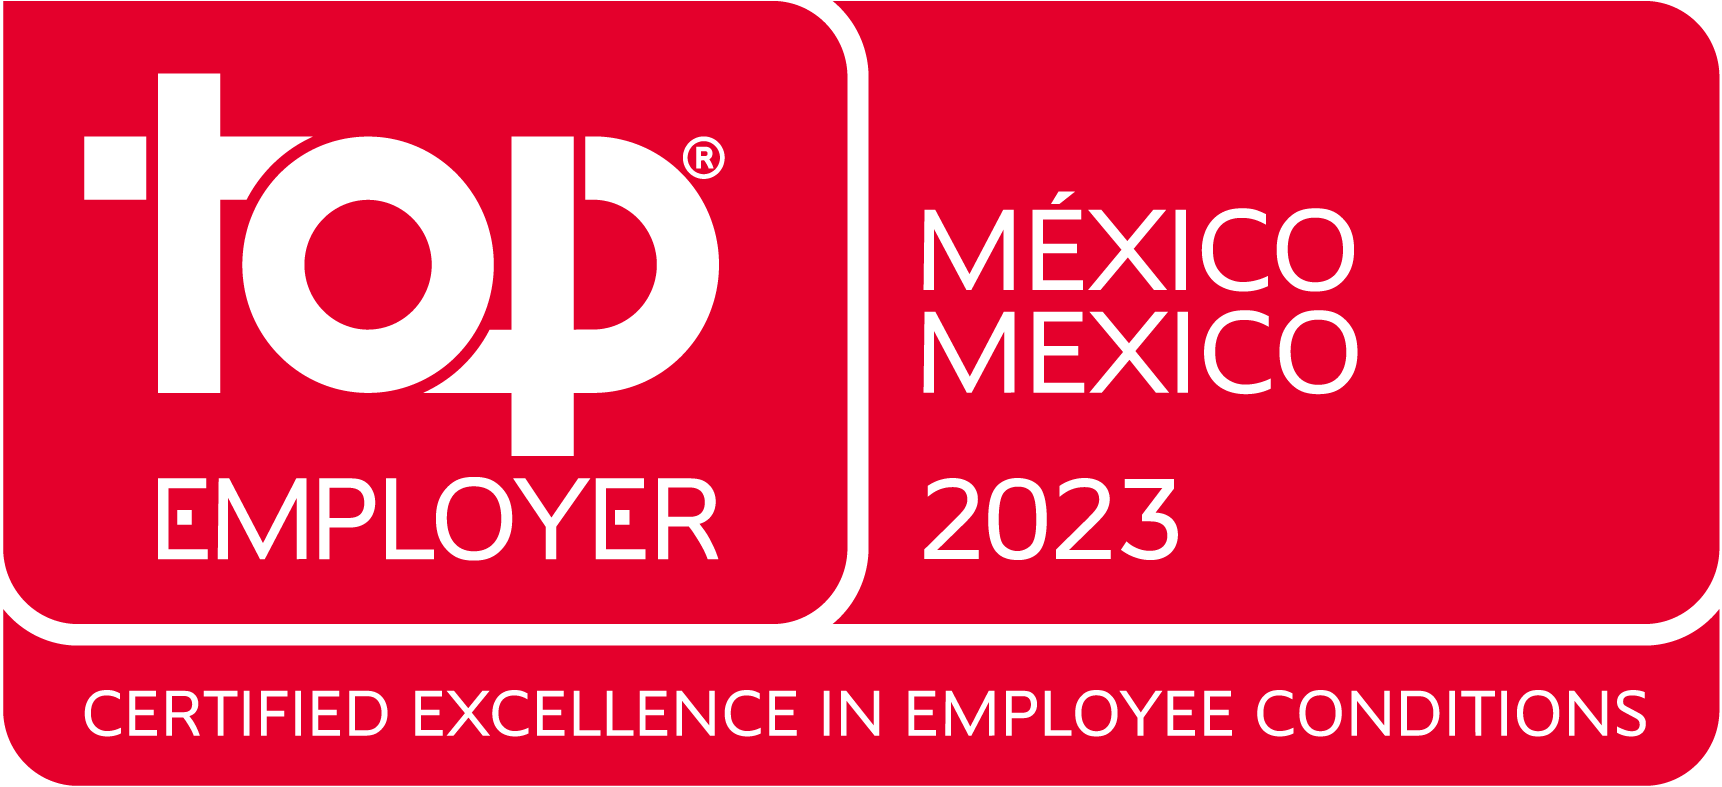 Mexico-Certified-companies-2023.png